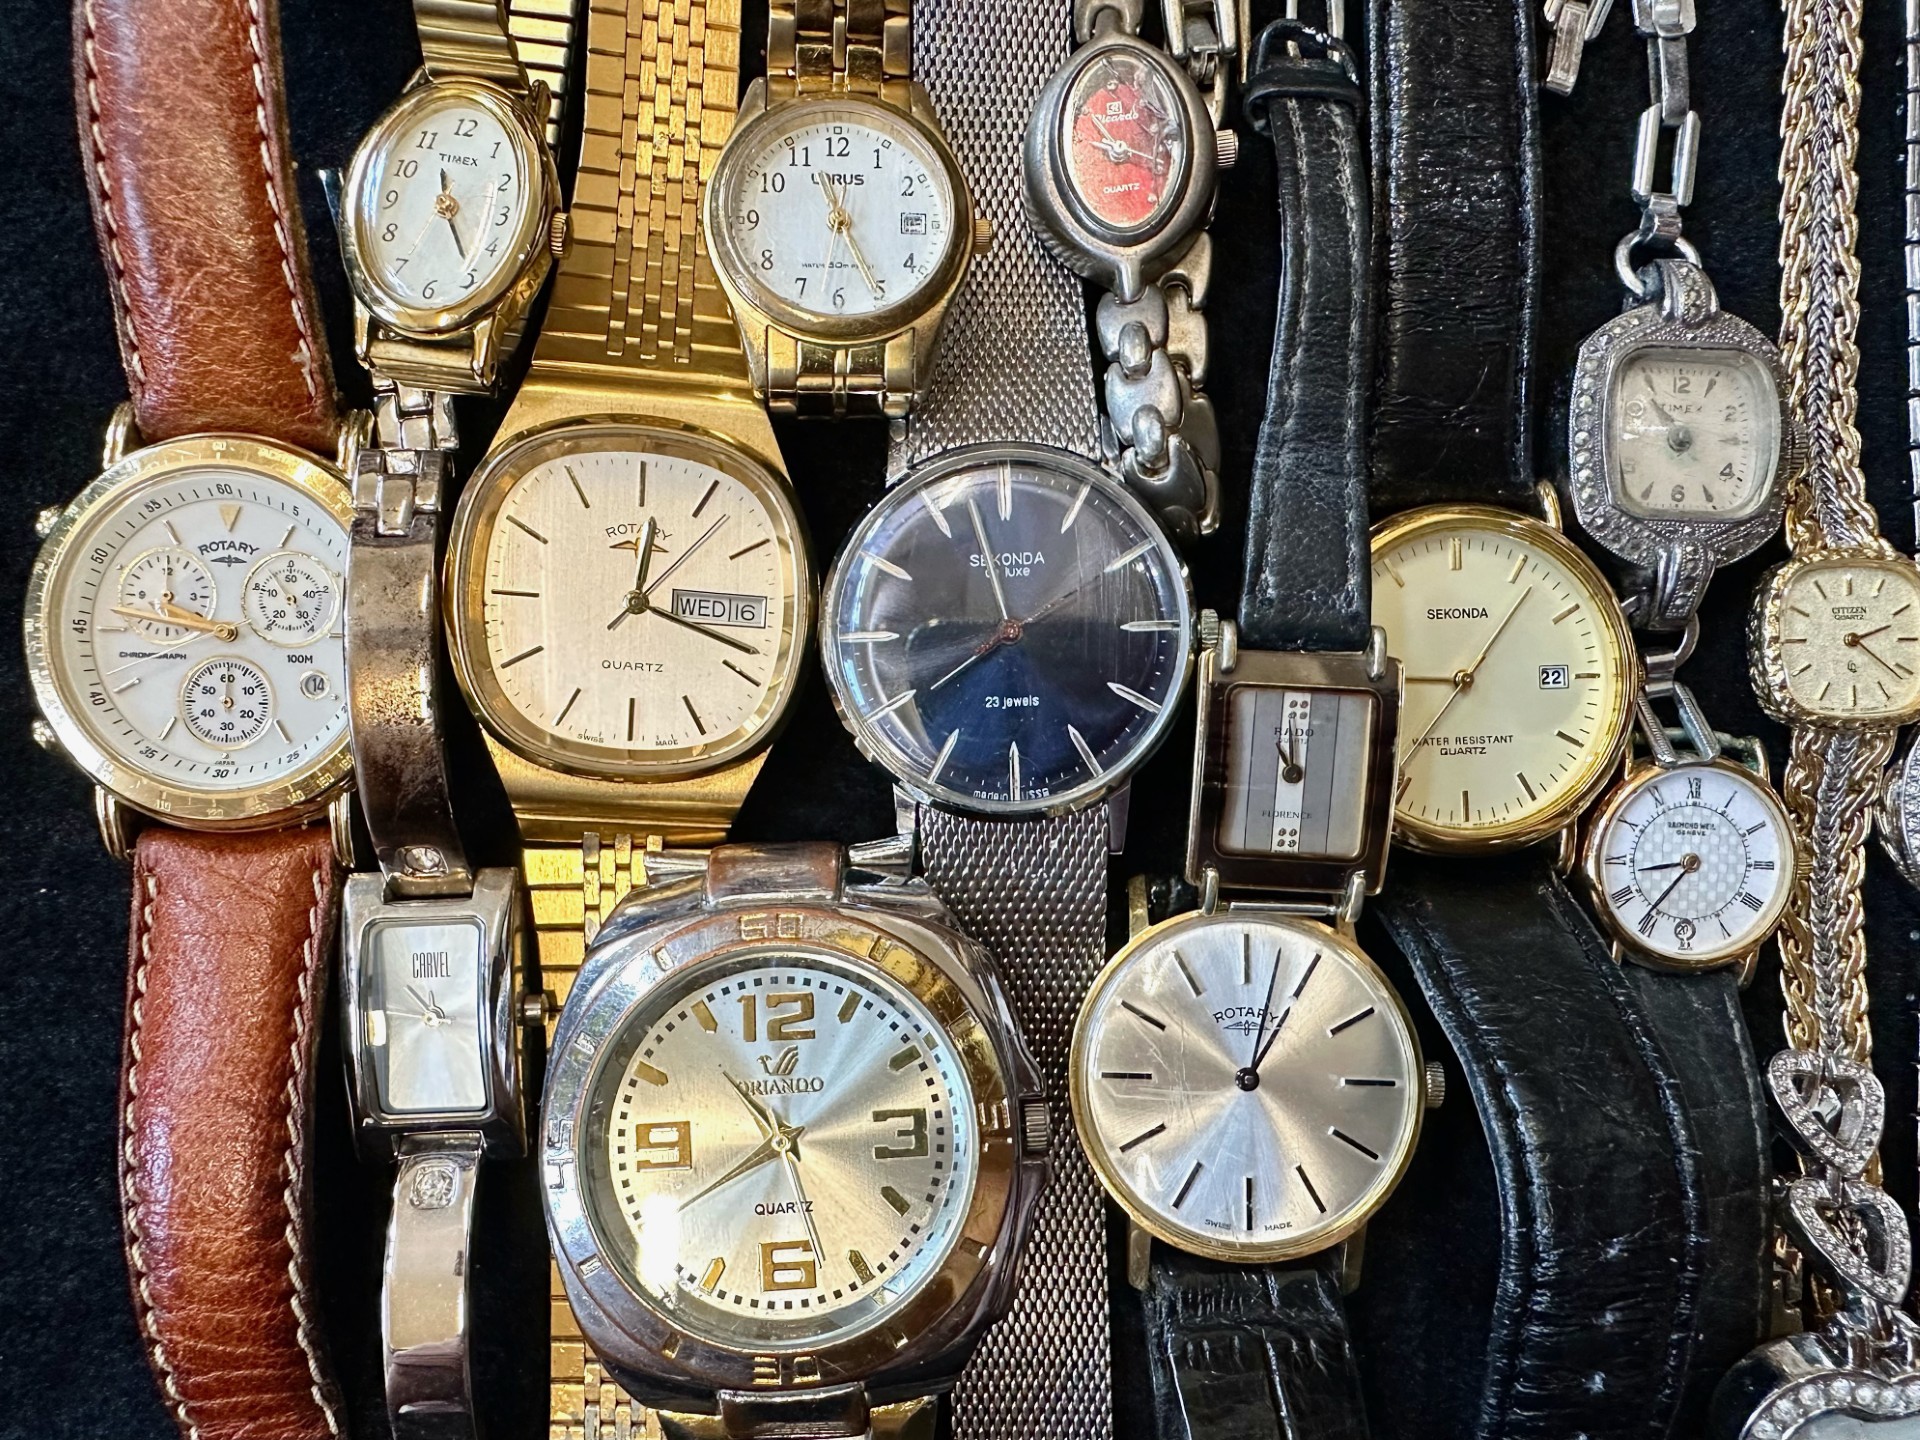 Collection of Ladies & Gentleman's Wristwatches, leather and bracelet straps, makes include Sekonda, - Image 2 of 3